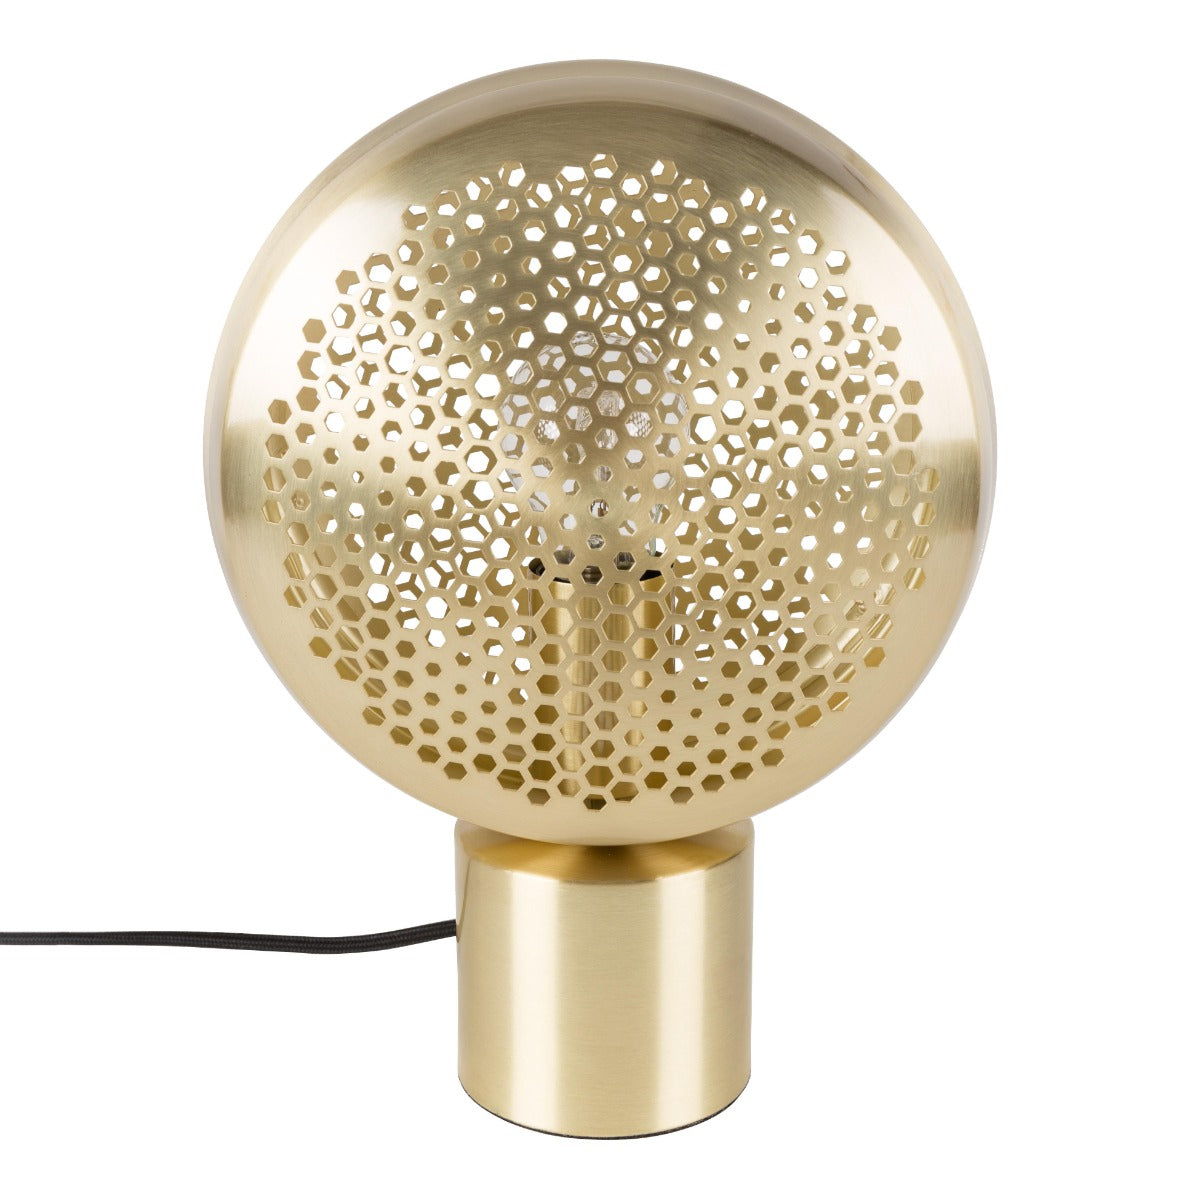 The Gringo Brass table lamp certainly combines the features of strong family ties. This is not just about a noticeable honeycomb made of metal covered with brass, but also about the possibility of seeing a unique bottom in it. Thanks to our fascinating design, we assure you that everyone who only sees her will not be able to take his eyes off her in a modern living room. Put it in a boho bedroom on the bedside table, we provide coziness and the right atmosphere before bedtime.